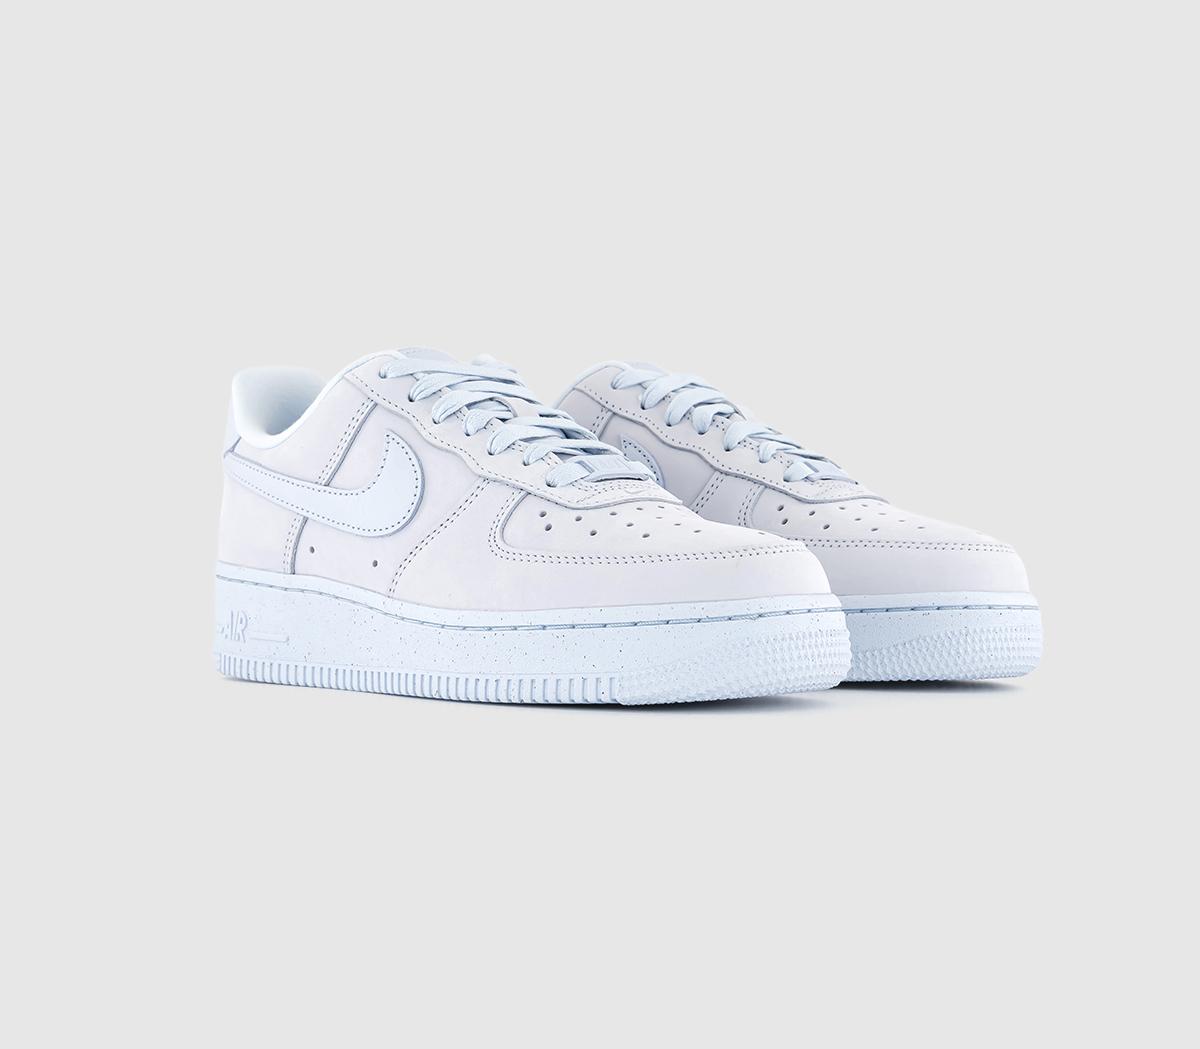 Nike Air Force 1 ’07 Prm Trainers Blue Tint, 6